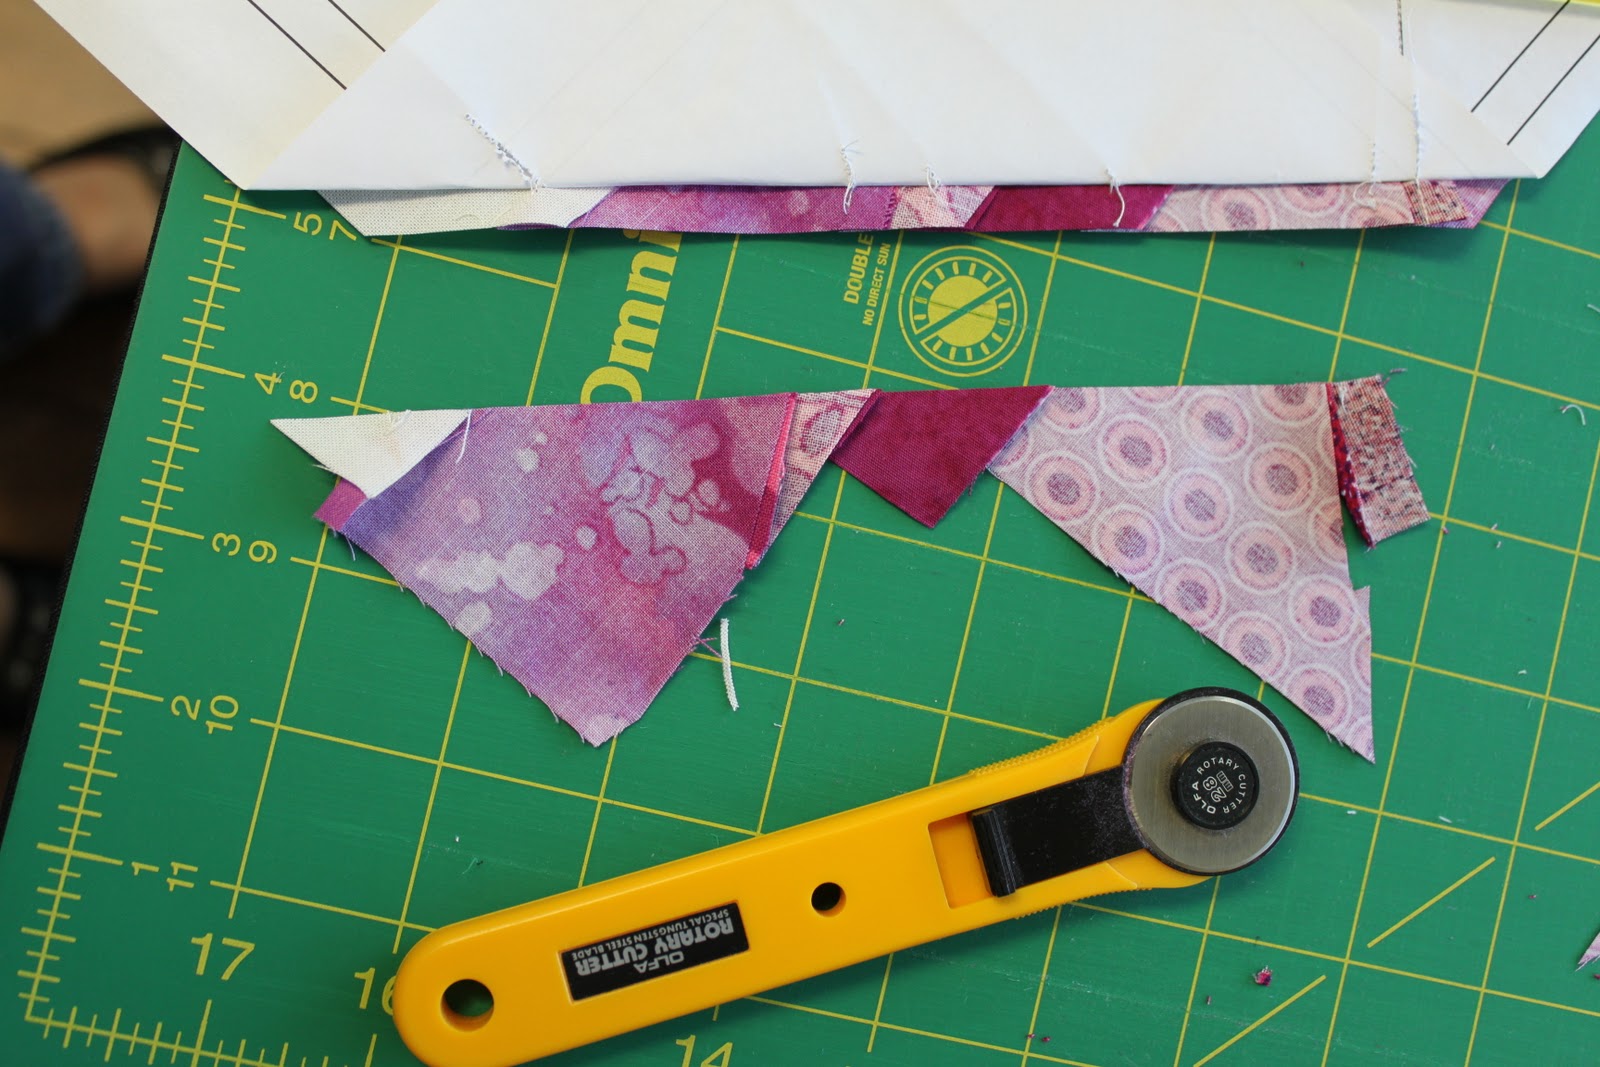 Folding and Seaming an Origami Bag - Stitches n Scraps